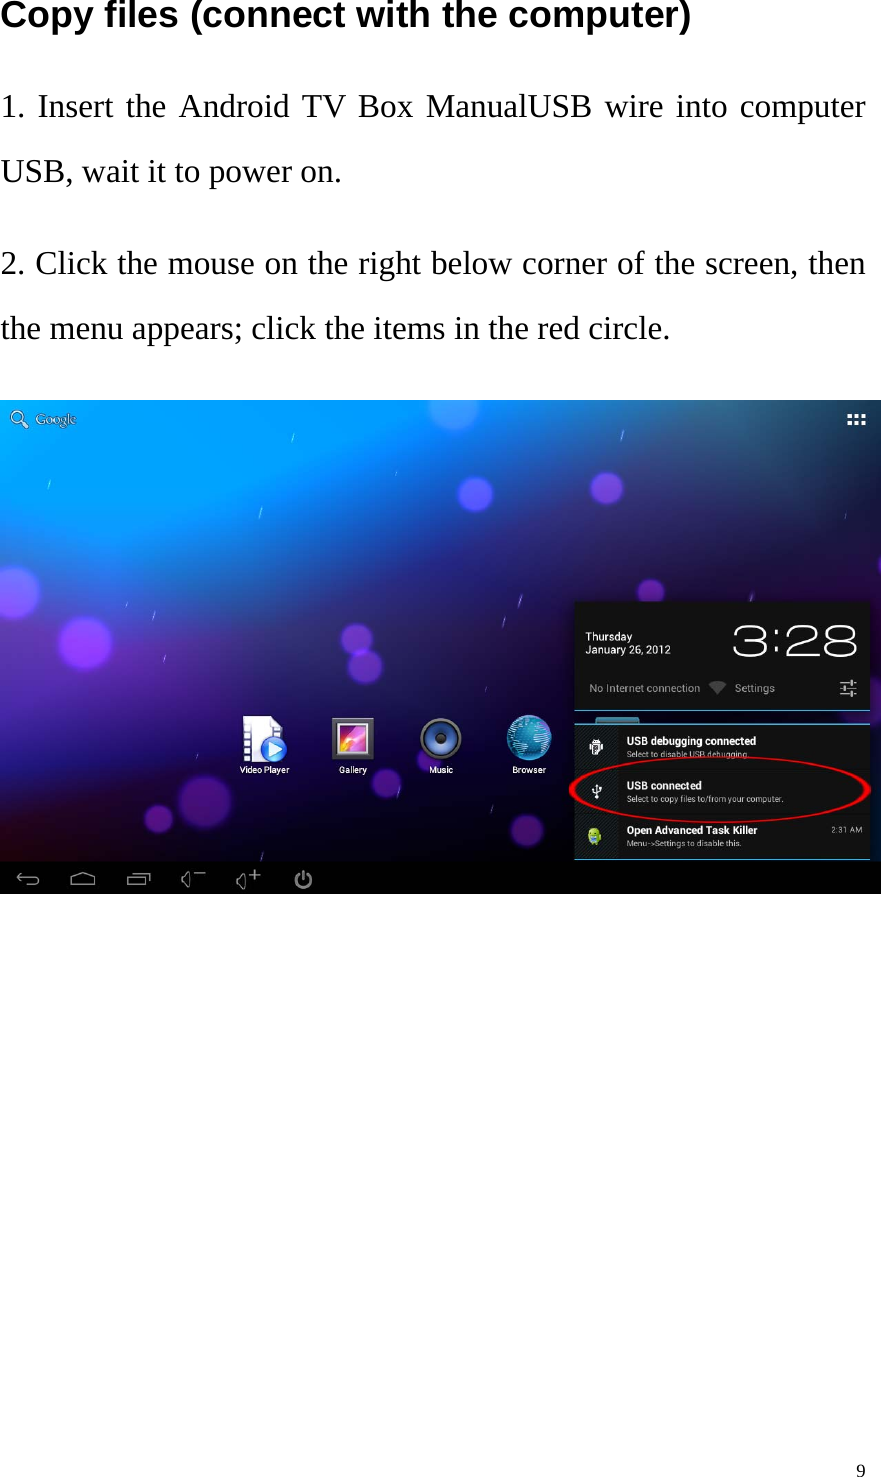    9Copy files (connect with the computer) 1. Insert the Android TV Box ManualUSB wire into computer USB, wait it to power on.   2. Click the mouse on the right below corner of the screen, then the menu appears; click the items in the red circle.  